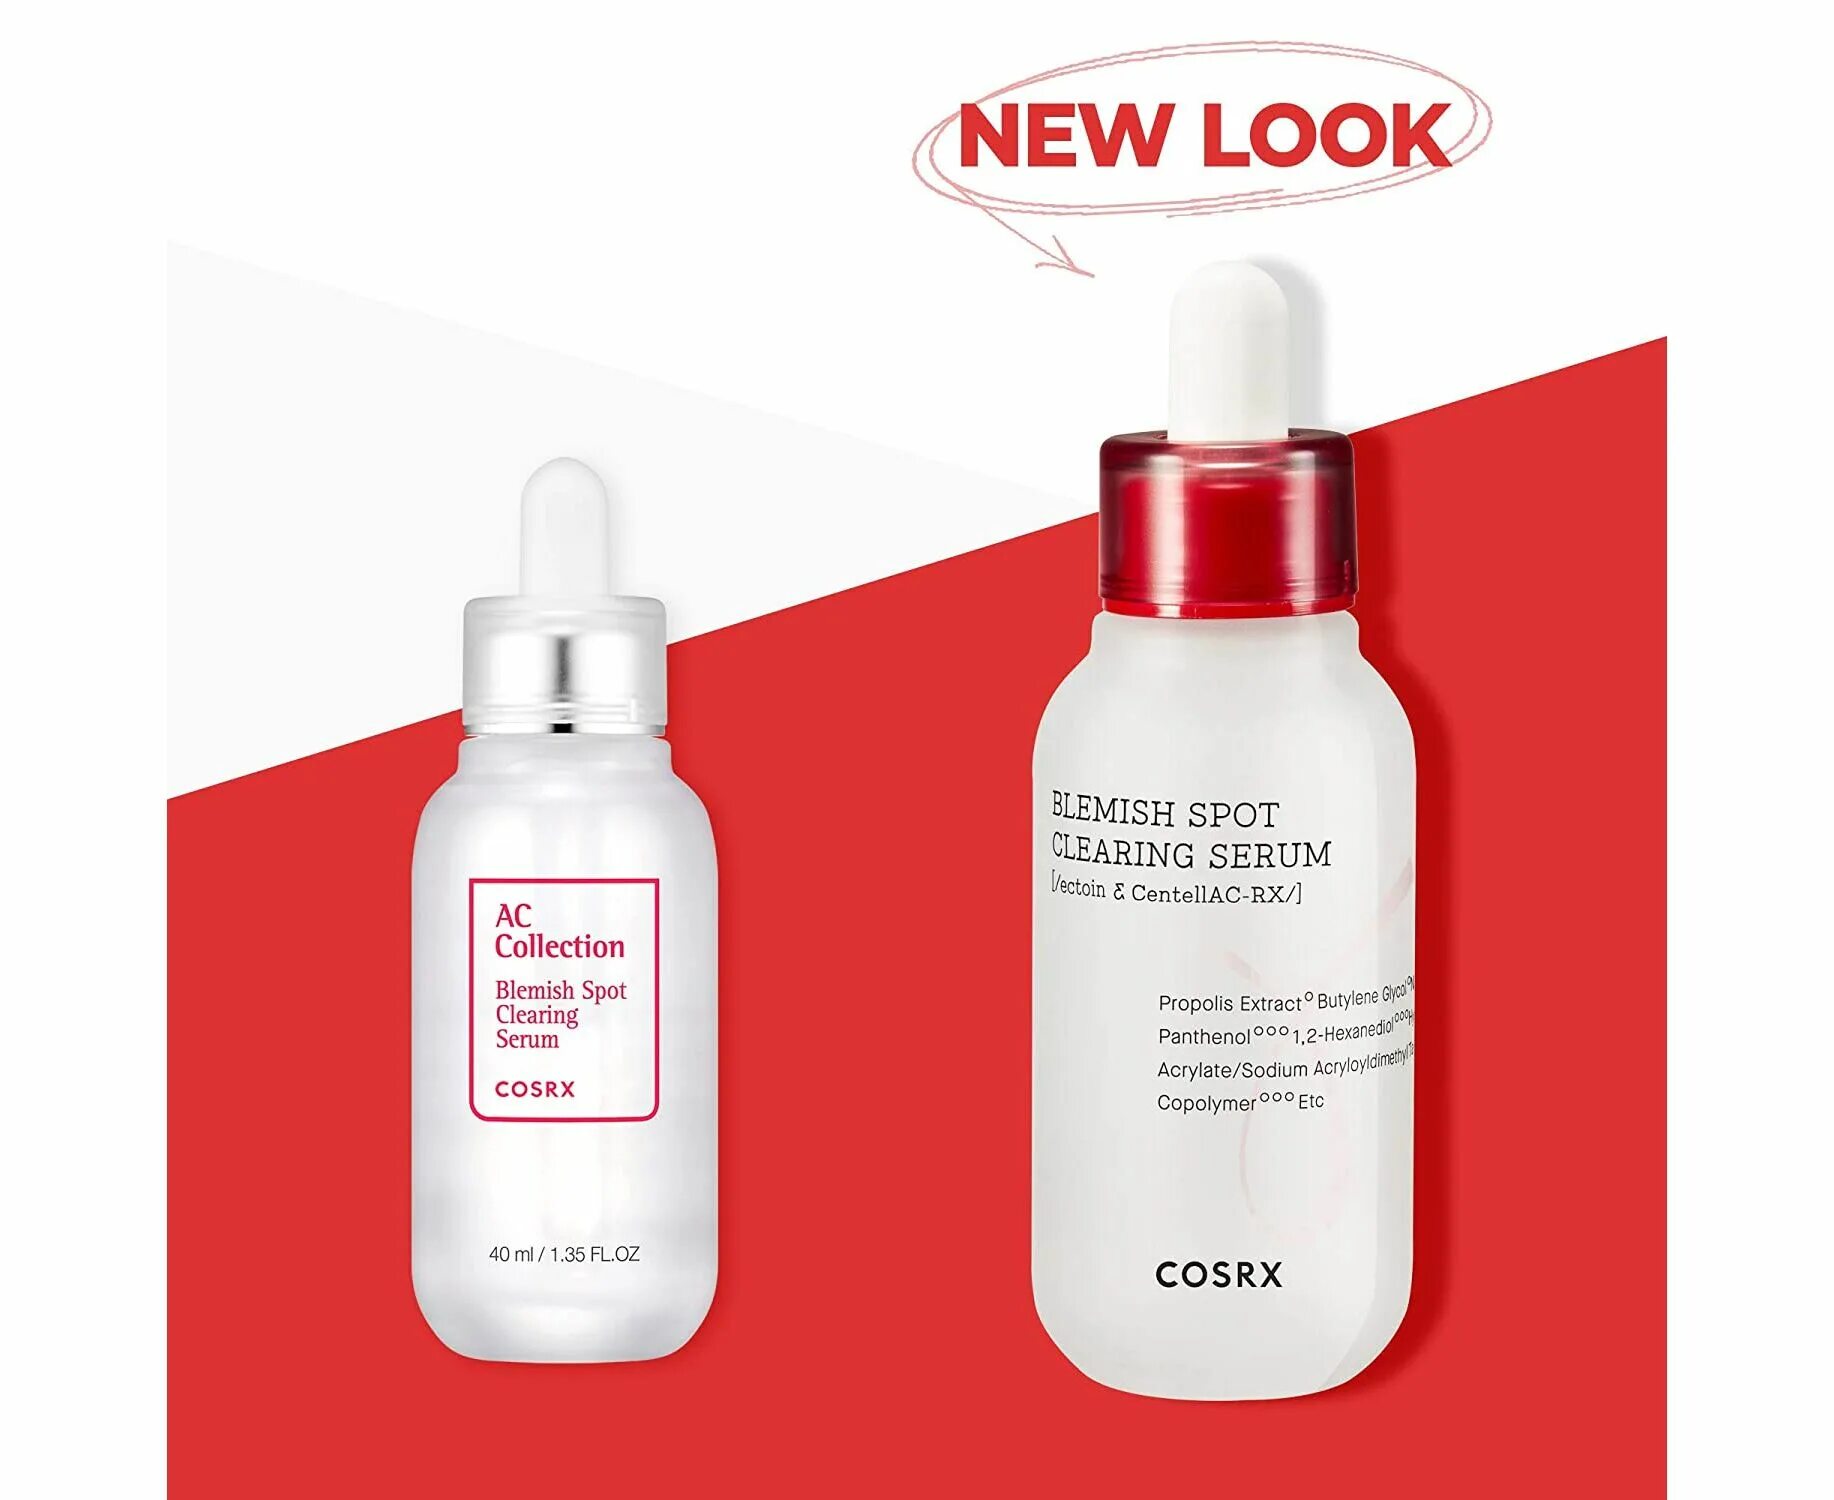 Ac collection. AC collection Blemish spot clearing Serum. COSRX AC collection Blemish spot clearing Serum. Сыворотка для проблемной кожи COSRX AC collection Blemish spot clearing Serum. COSRX AC collection Blemish spot Drying Lotion.